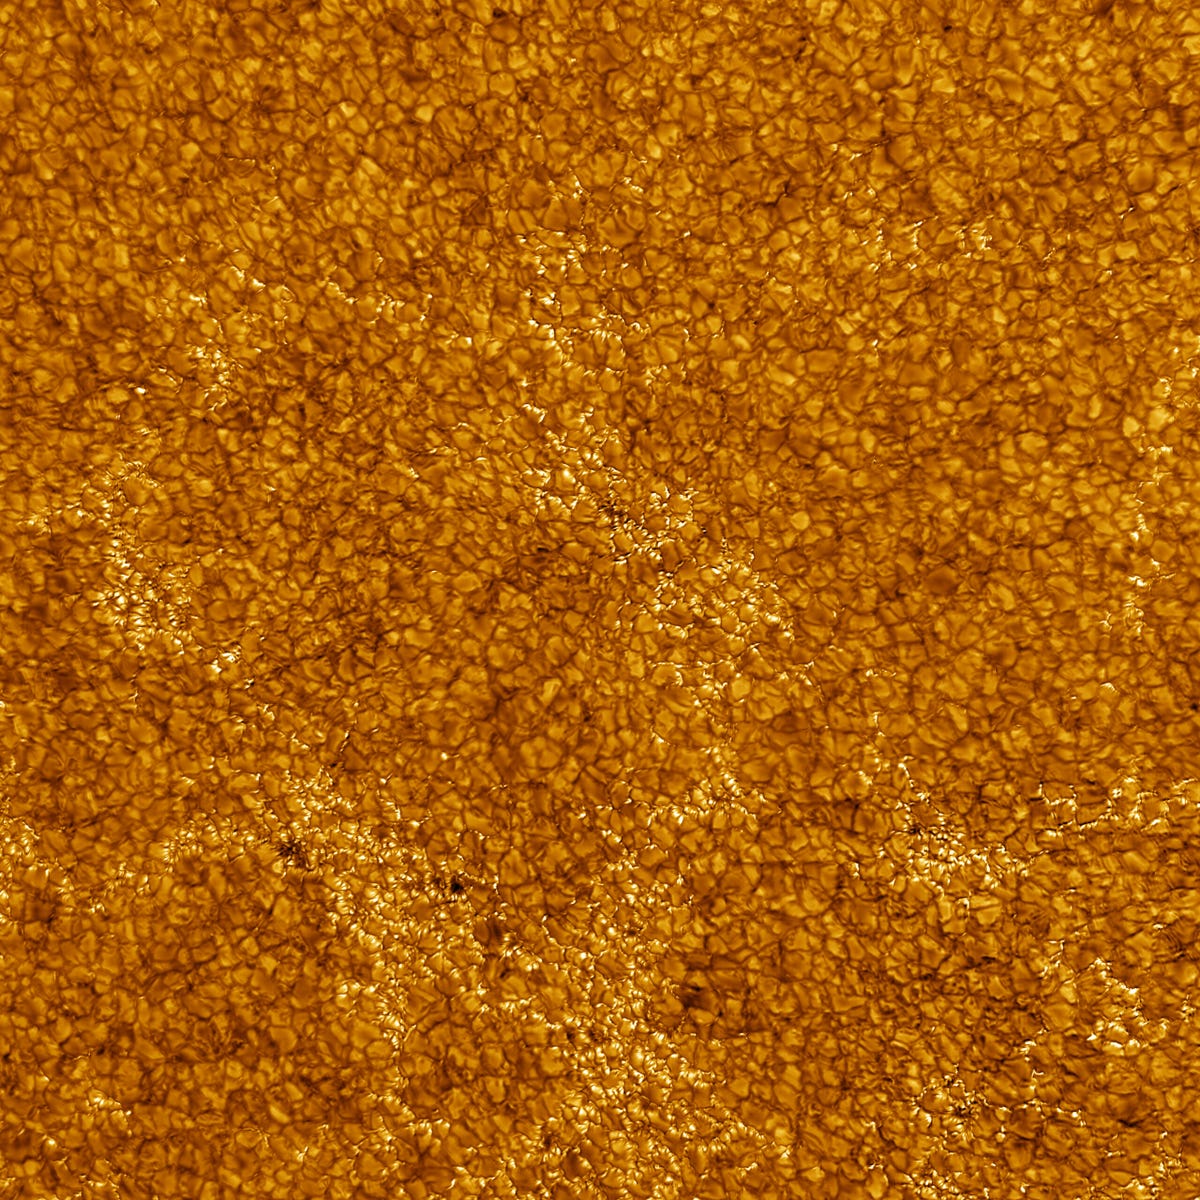 Orange and dark orange pebbly-looking view of the surface of the sun.